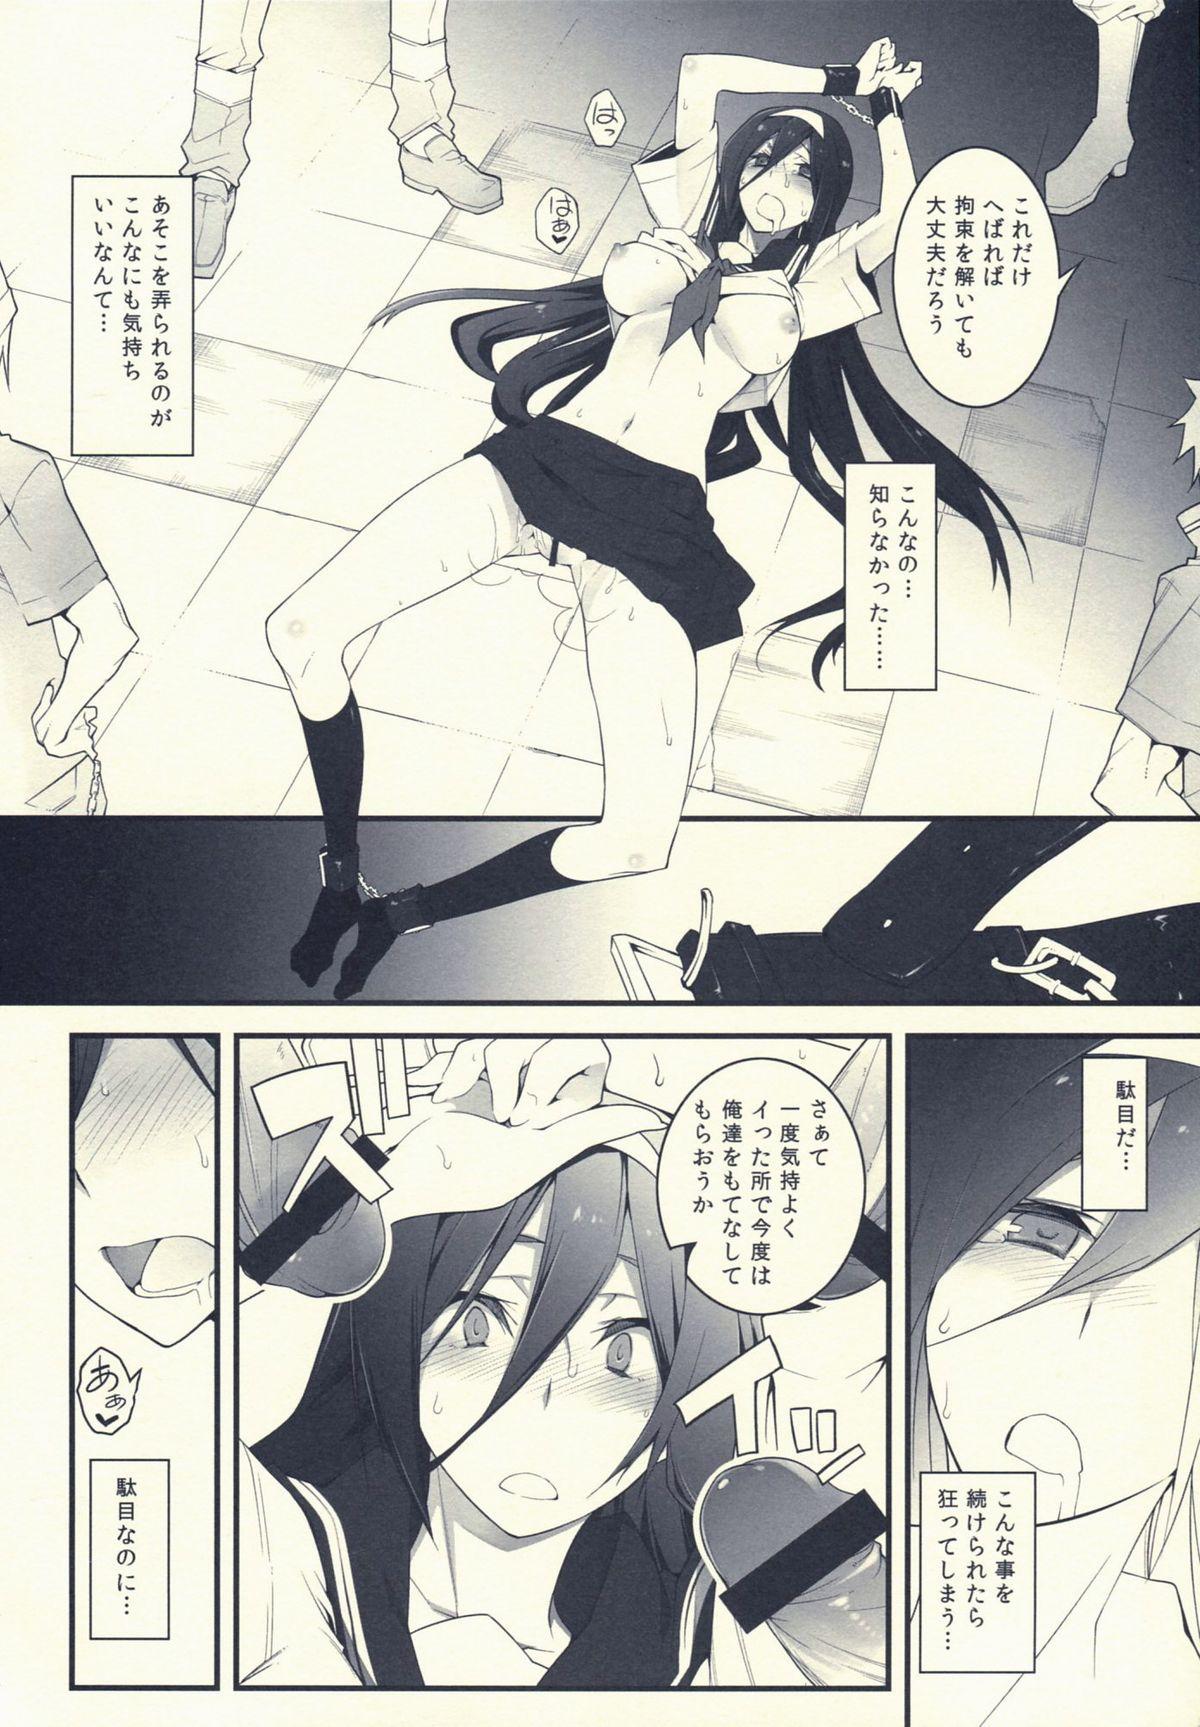 Ameteur Porn THE EMPRESS REVERSED - Hyouka Audition - Page 13